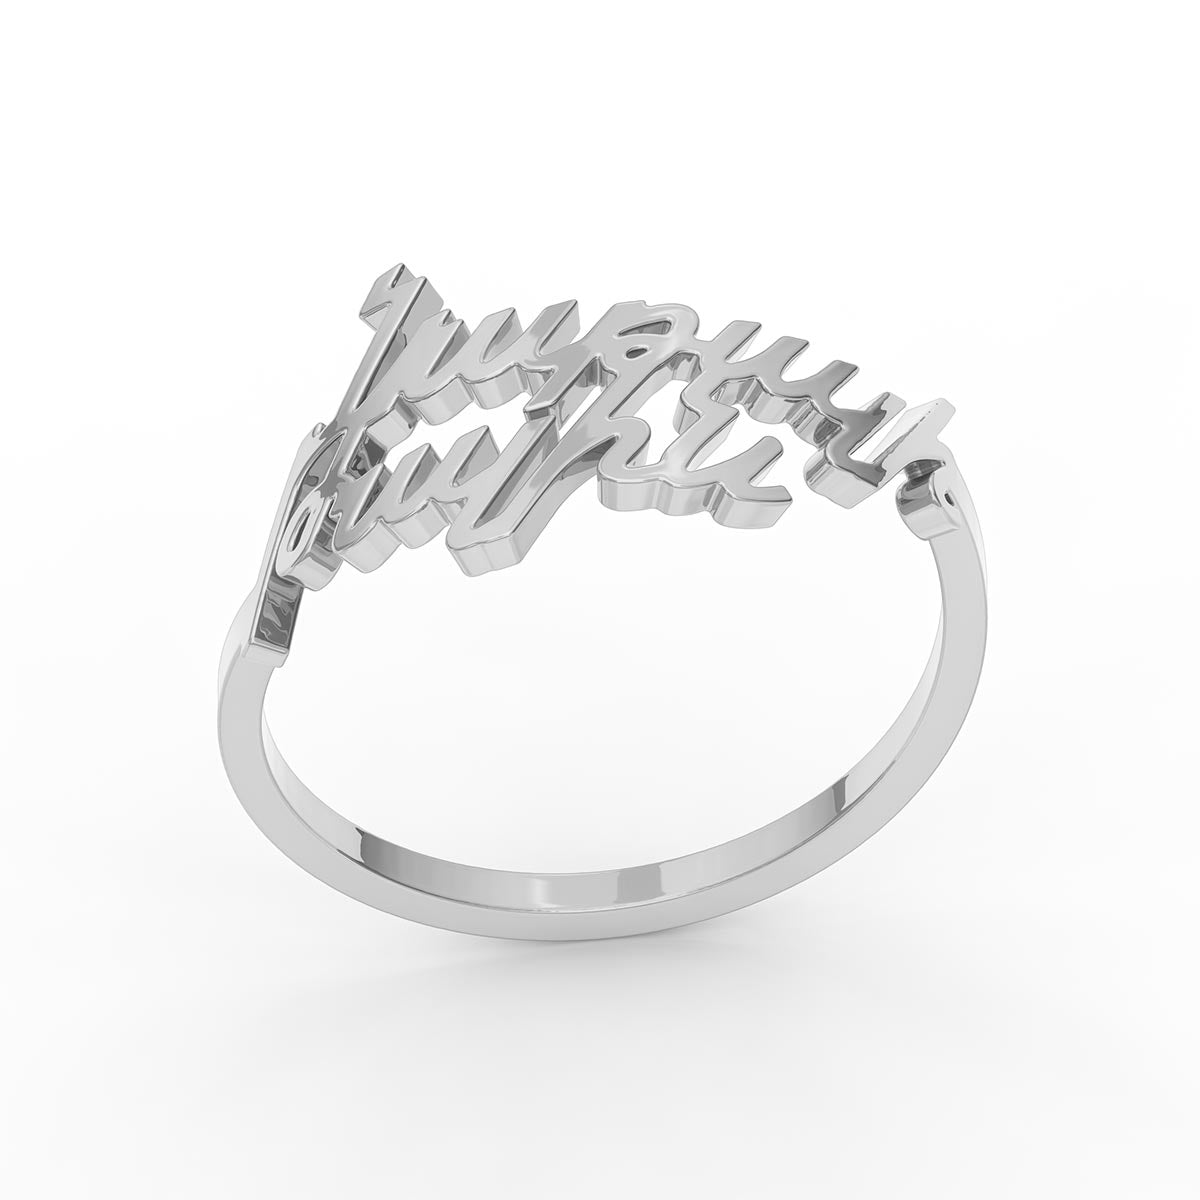 Personalized 2 Armenian Name Ring